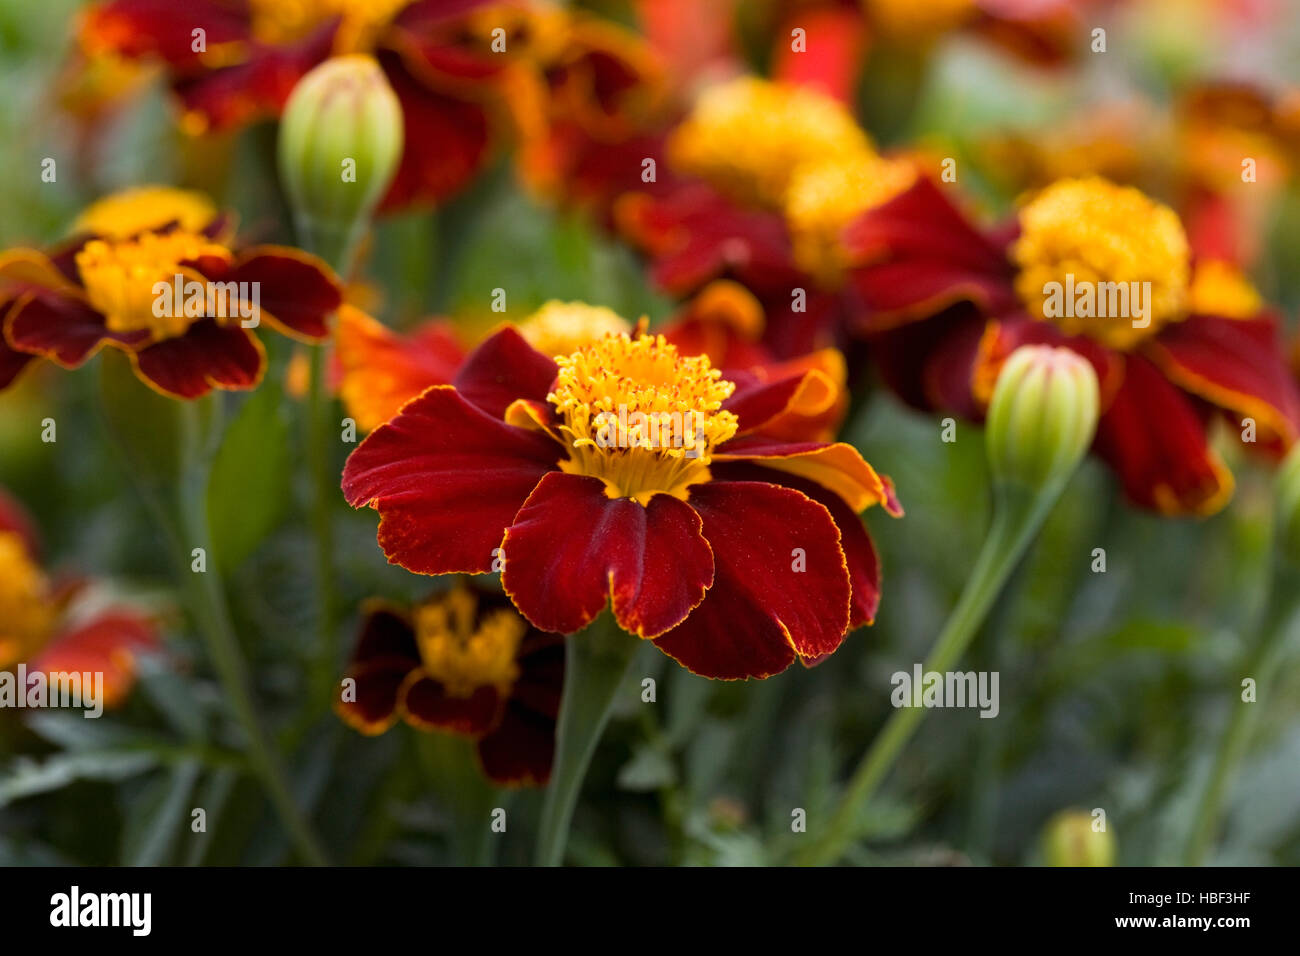 Tagetes patula. French marigolds growing in the garden. Stock Photo